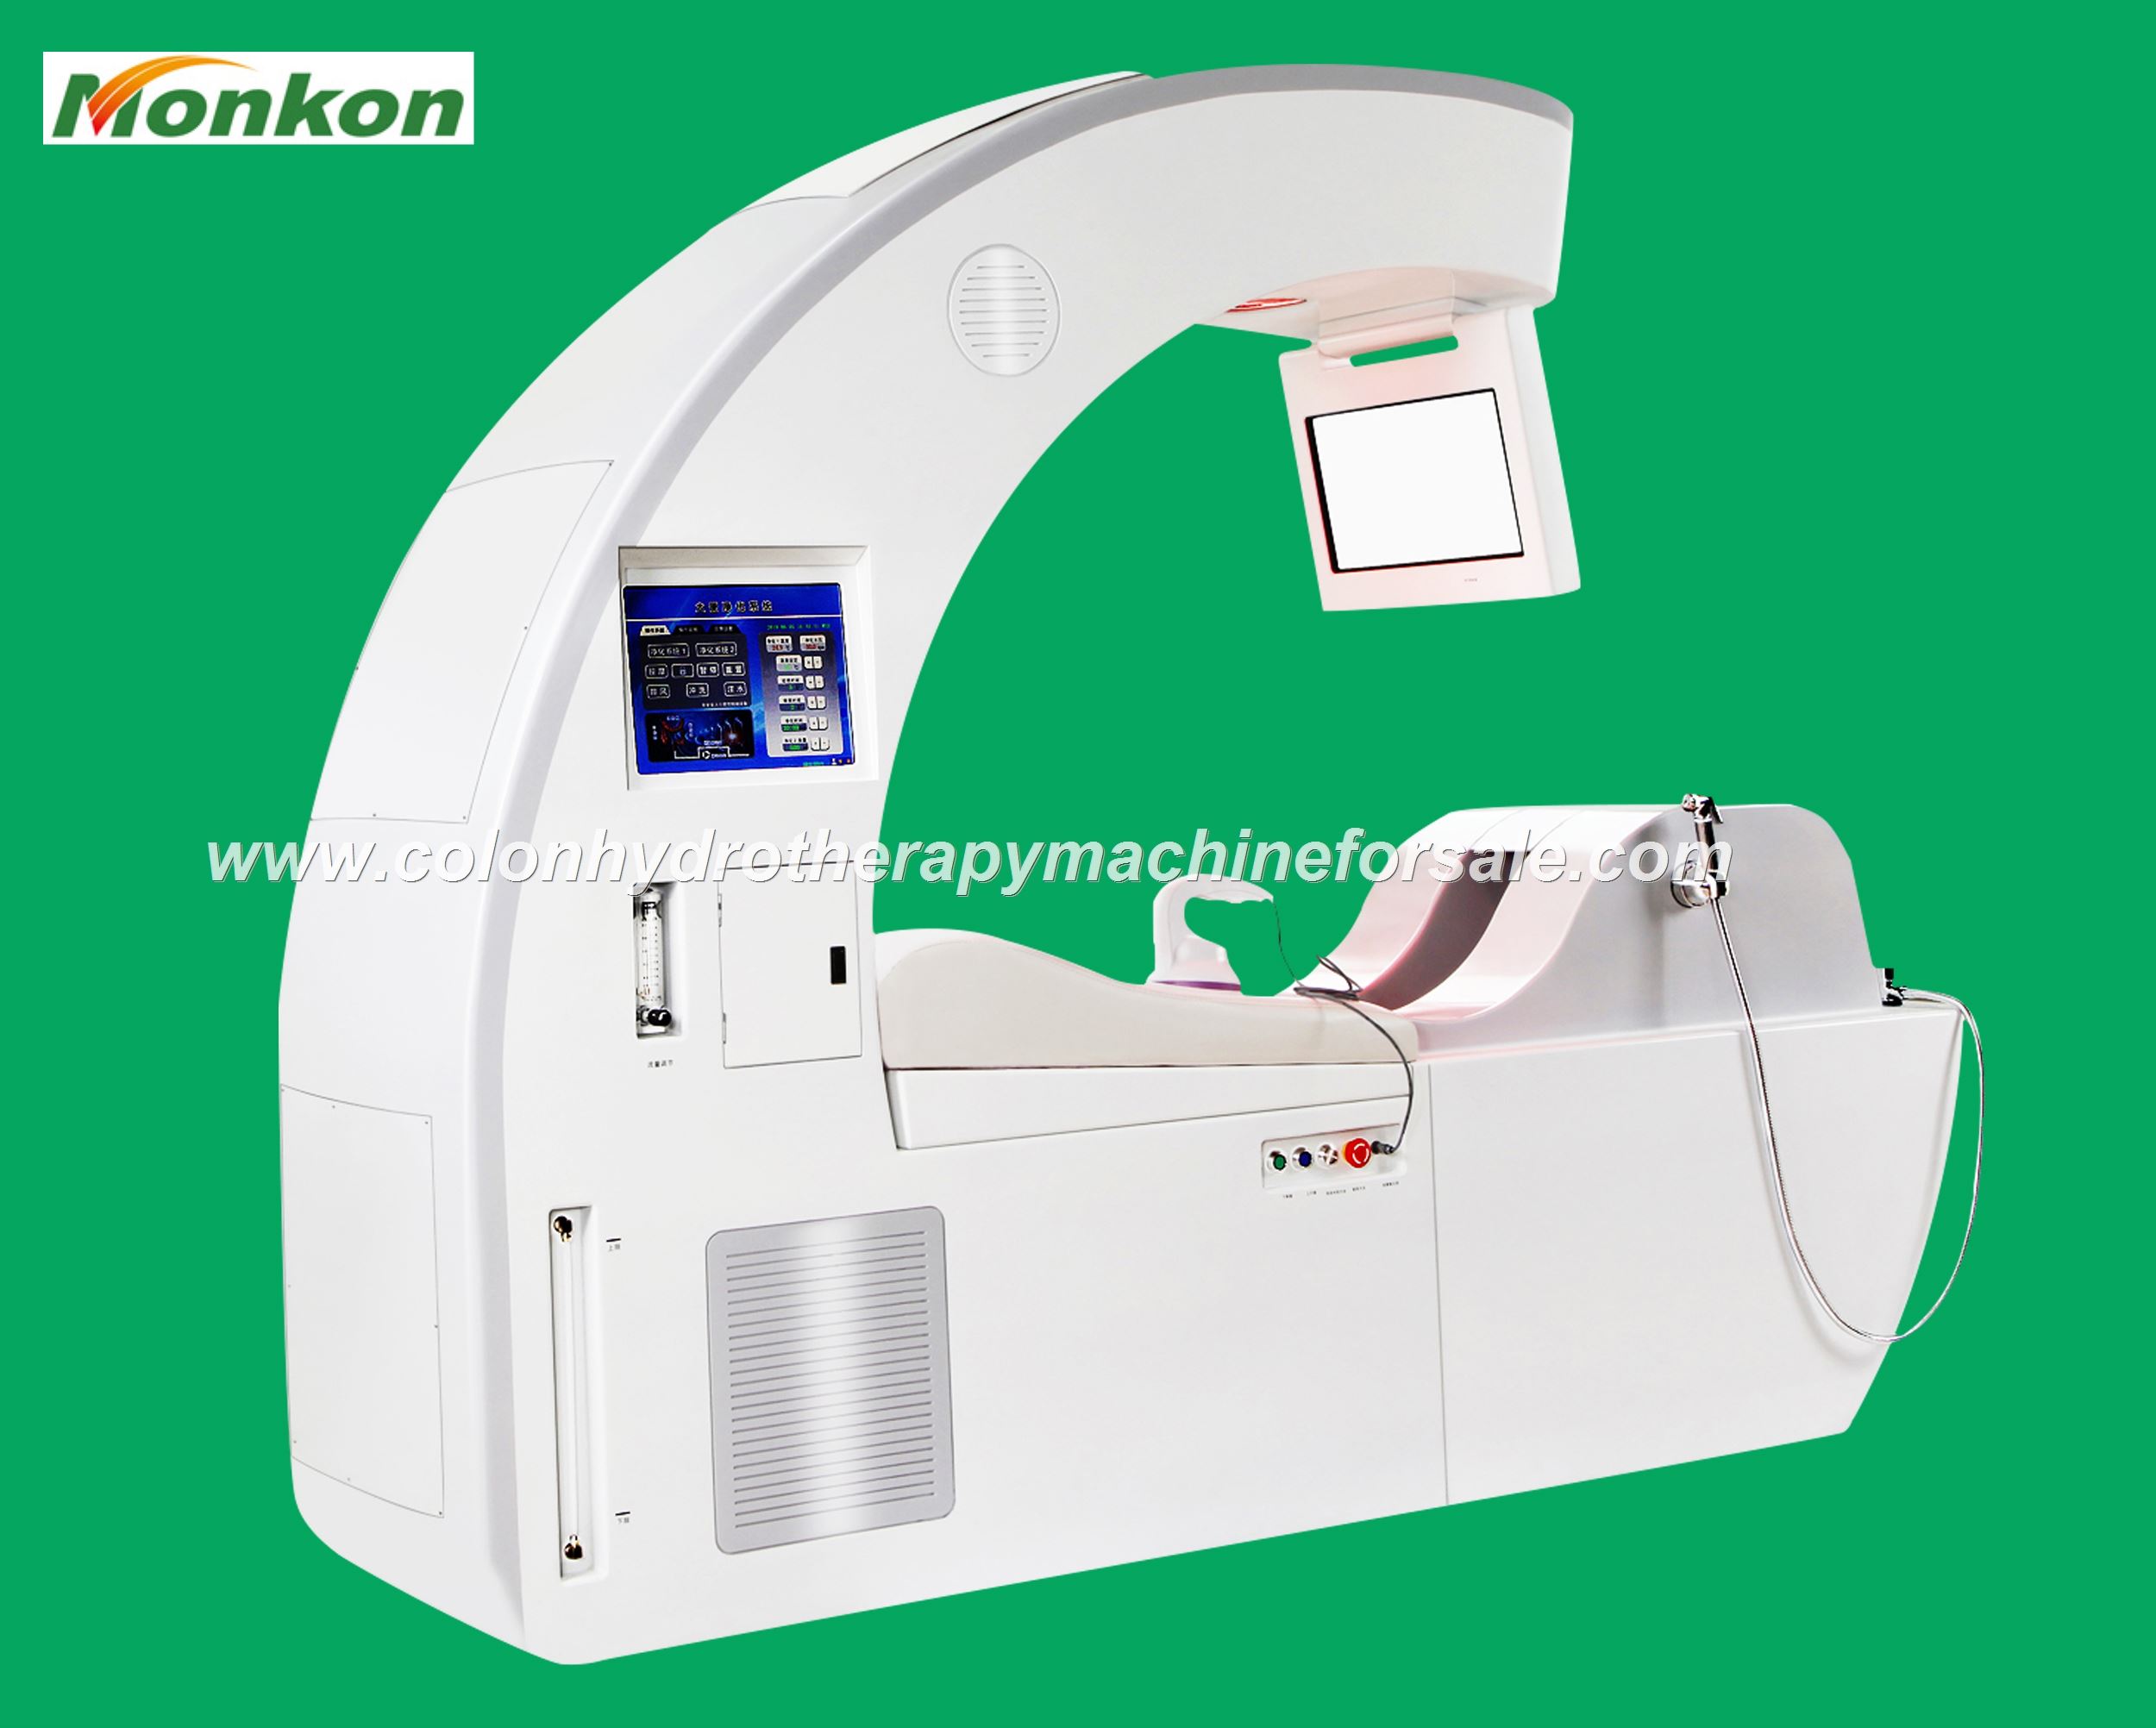 MAIKONG Libbe Colonic Machine for Sale